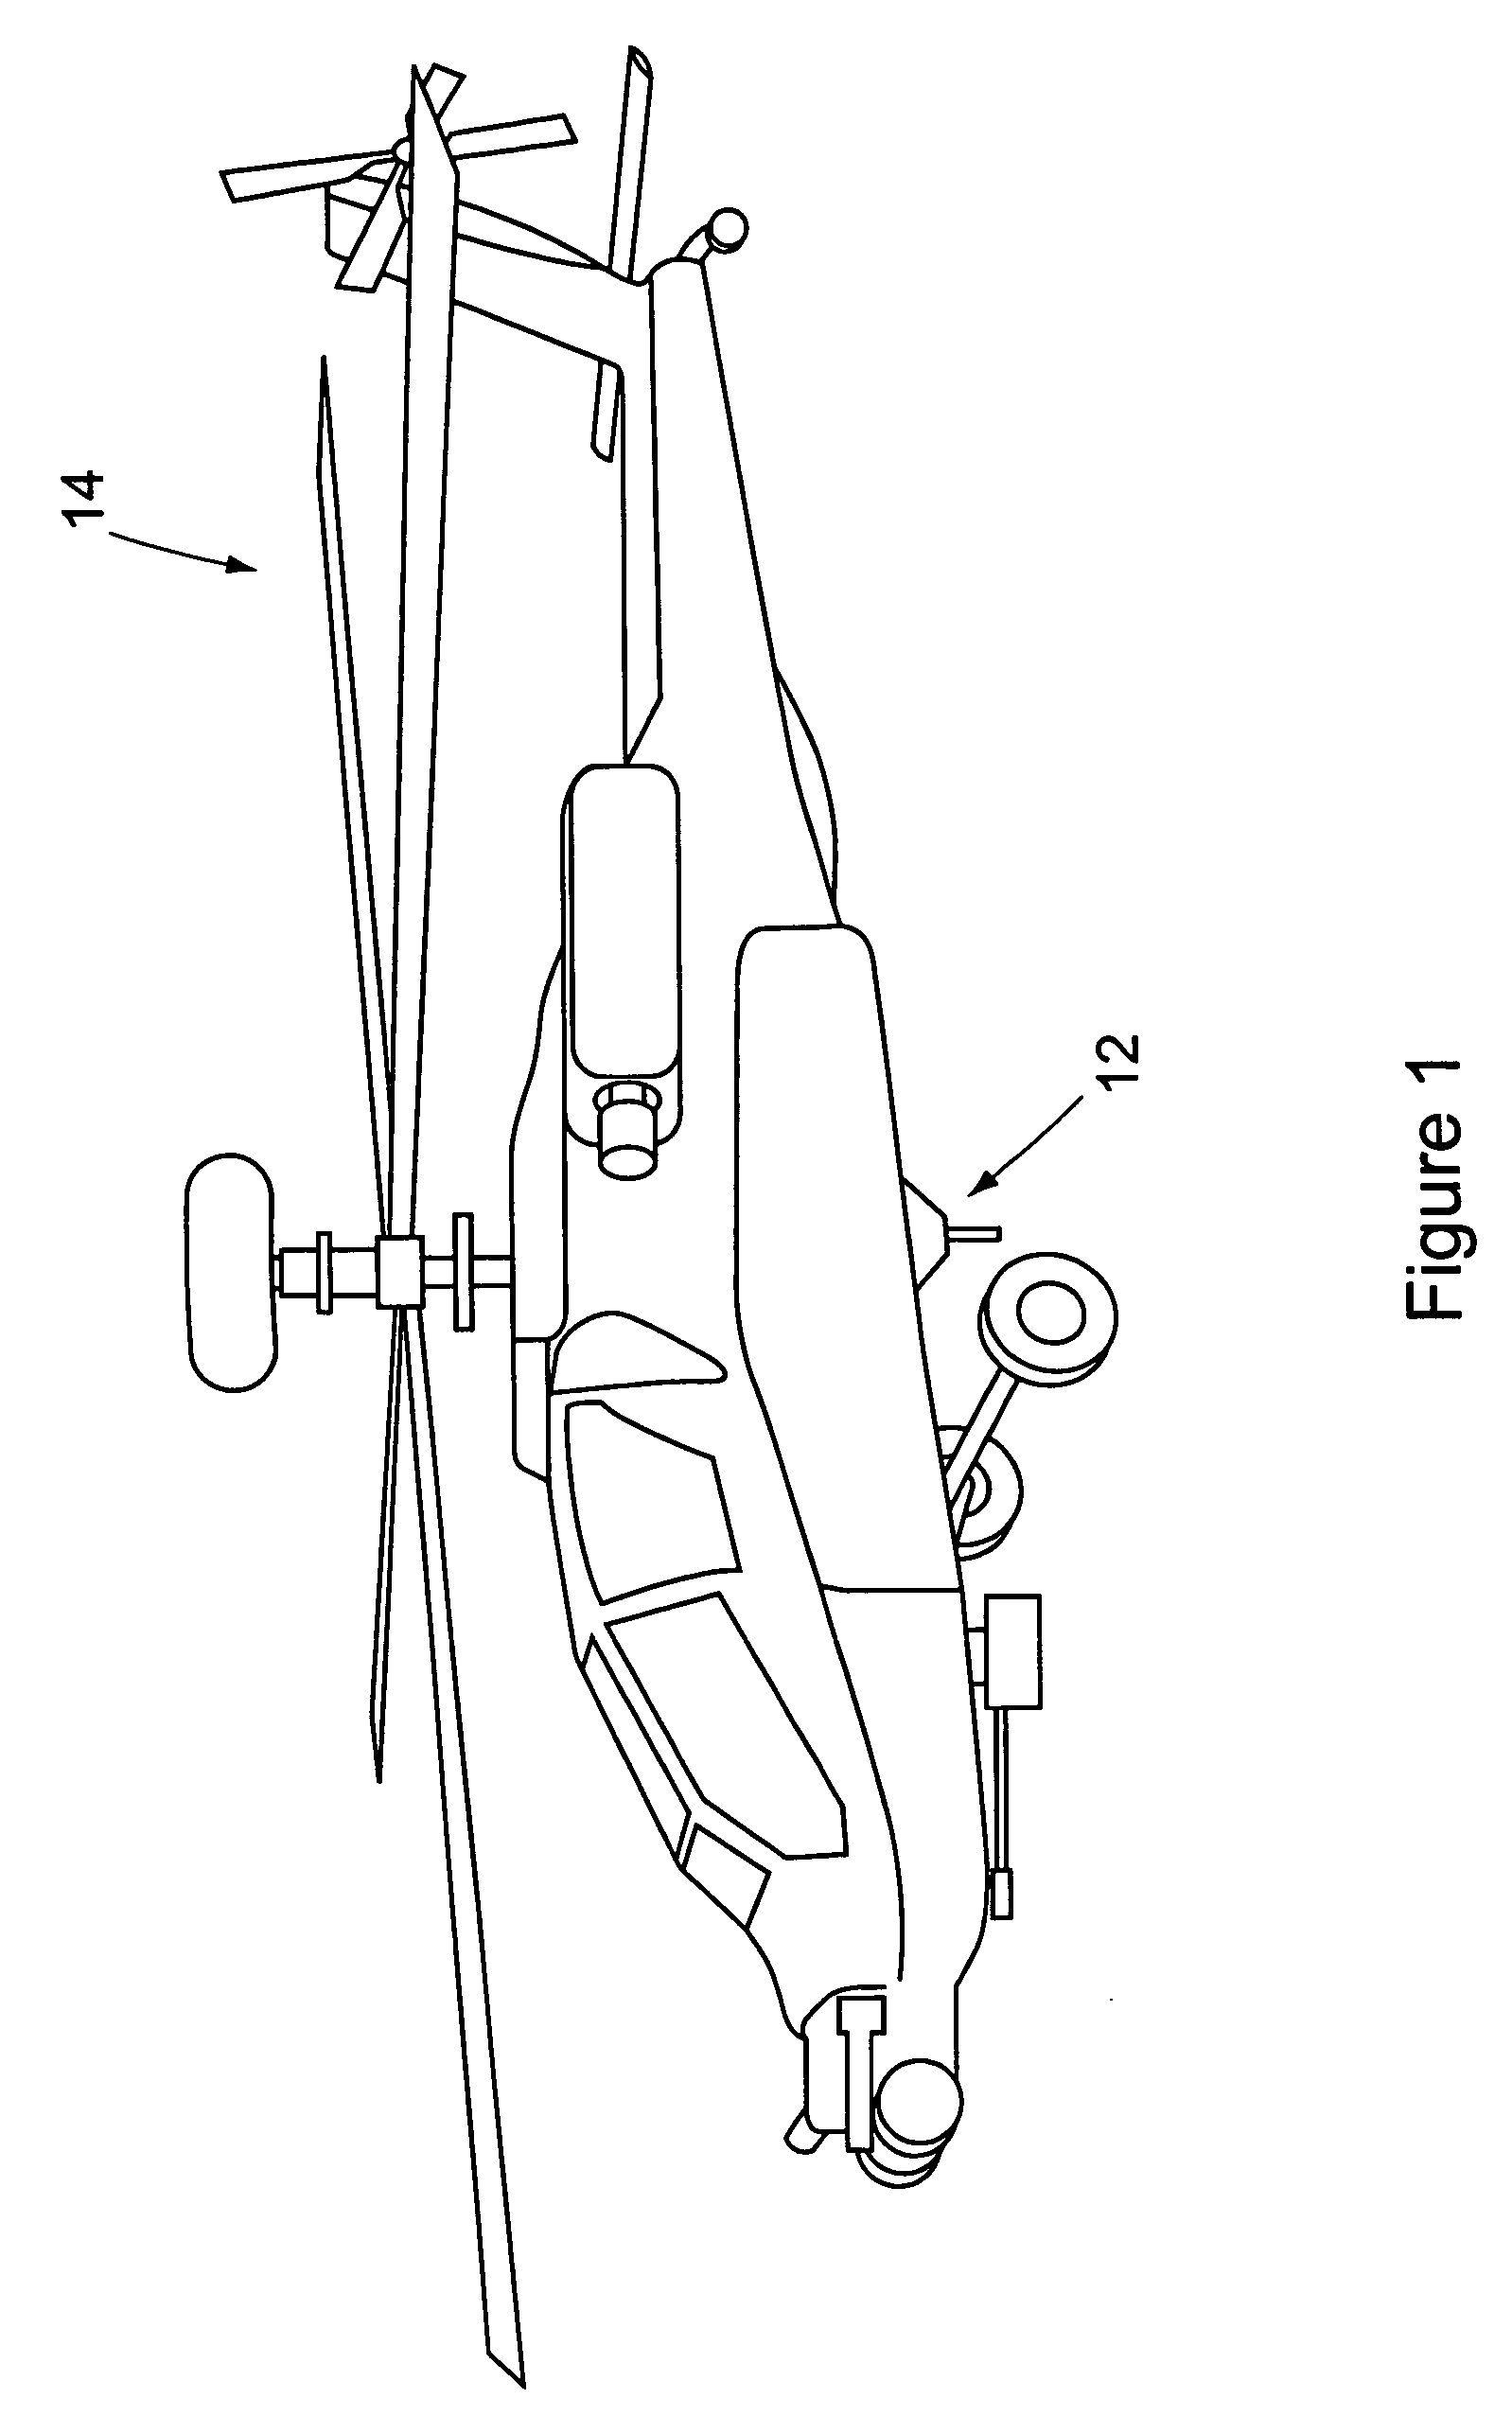 Landing assist probe mounting system